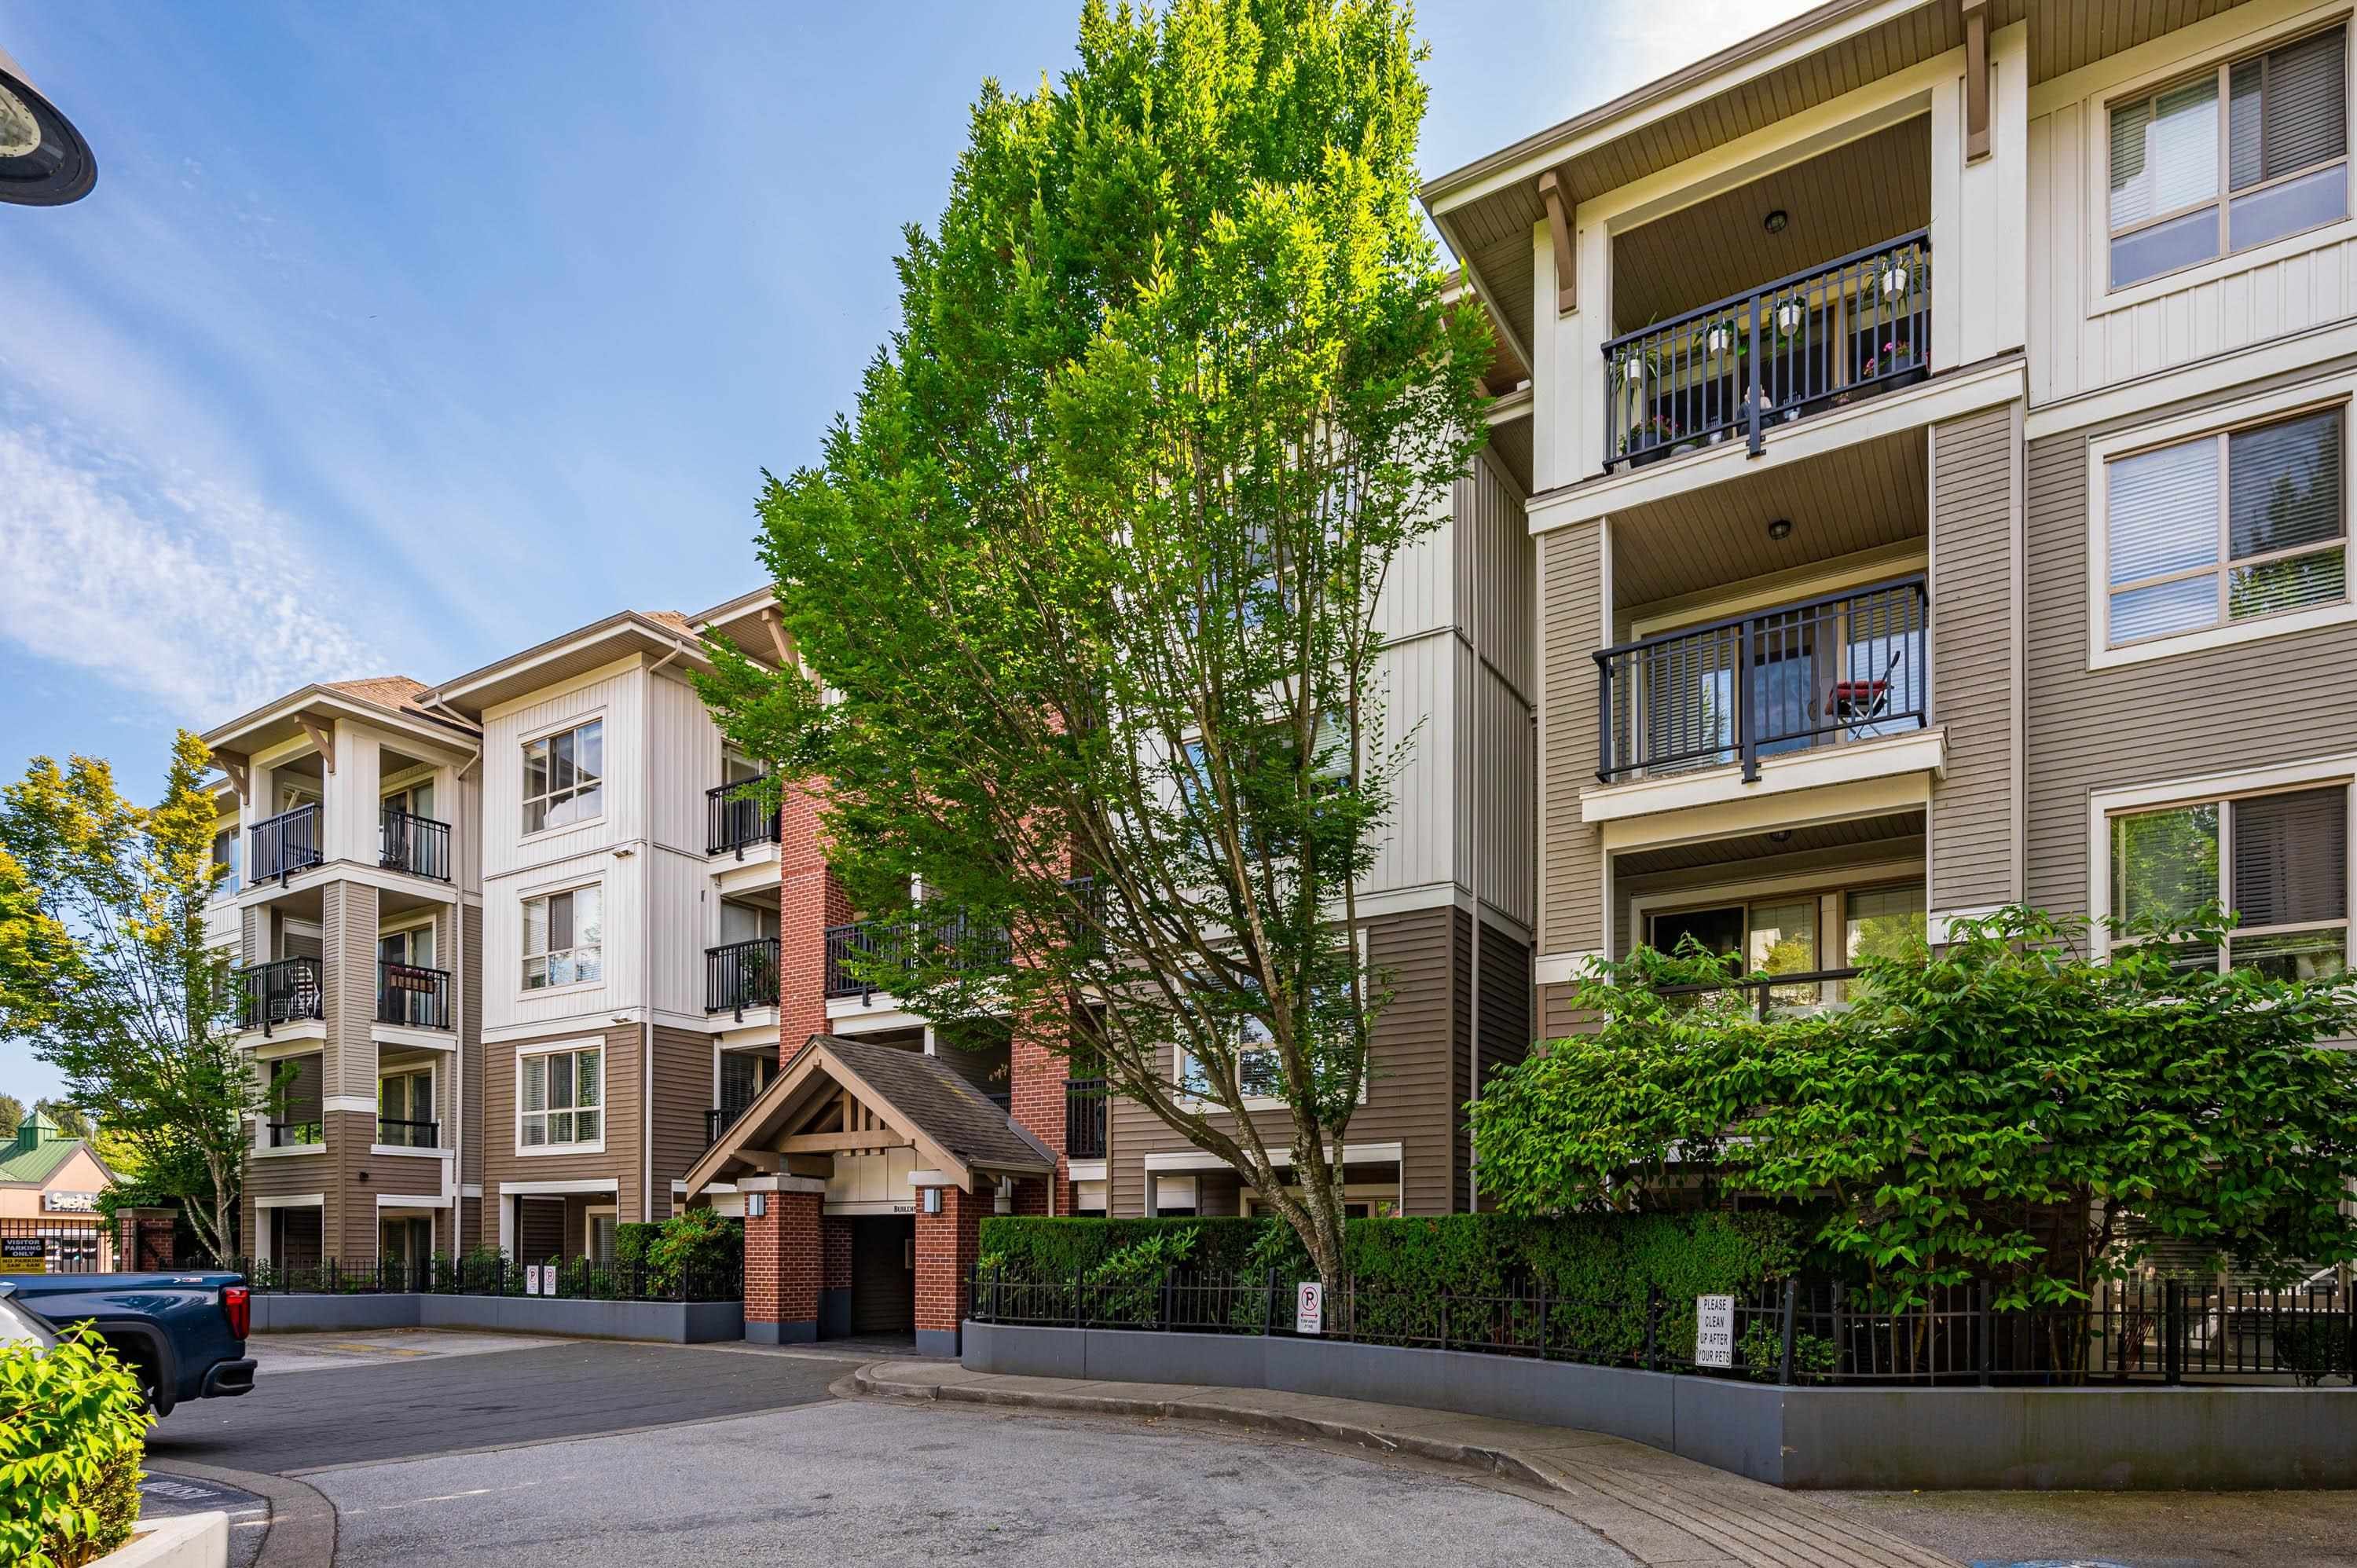 Welcome to B202 - 8929 202 Street, Langley at The Grove - a well-maintained gated condo complex in Walnut Grove.